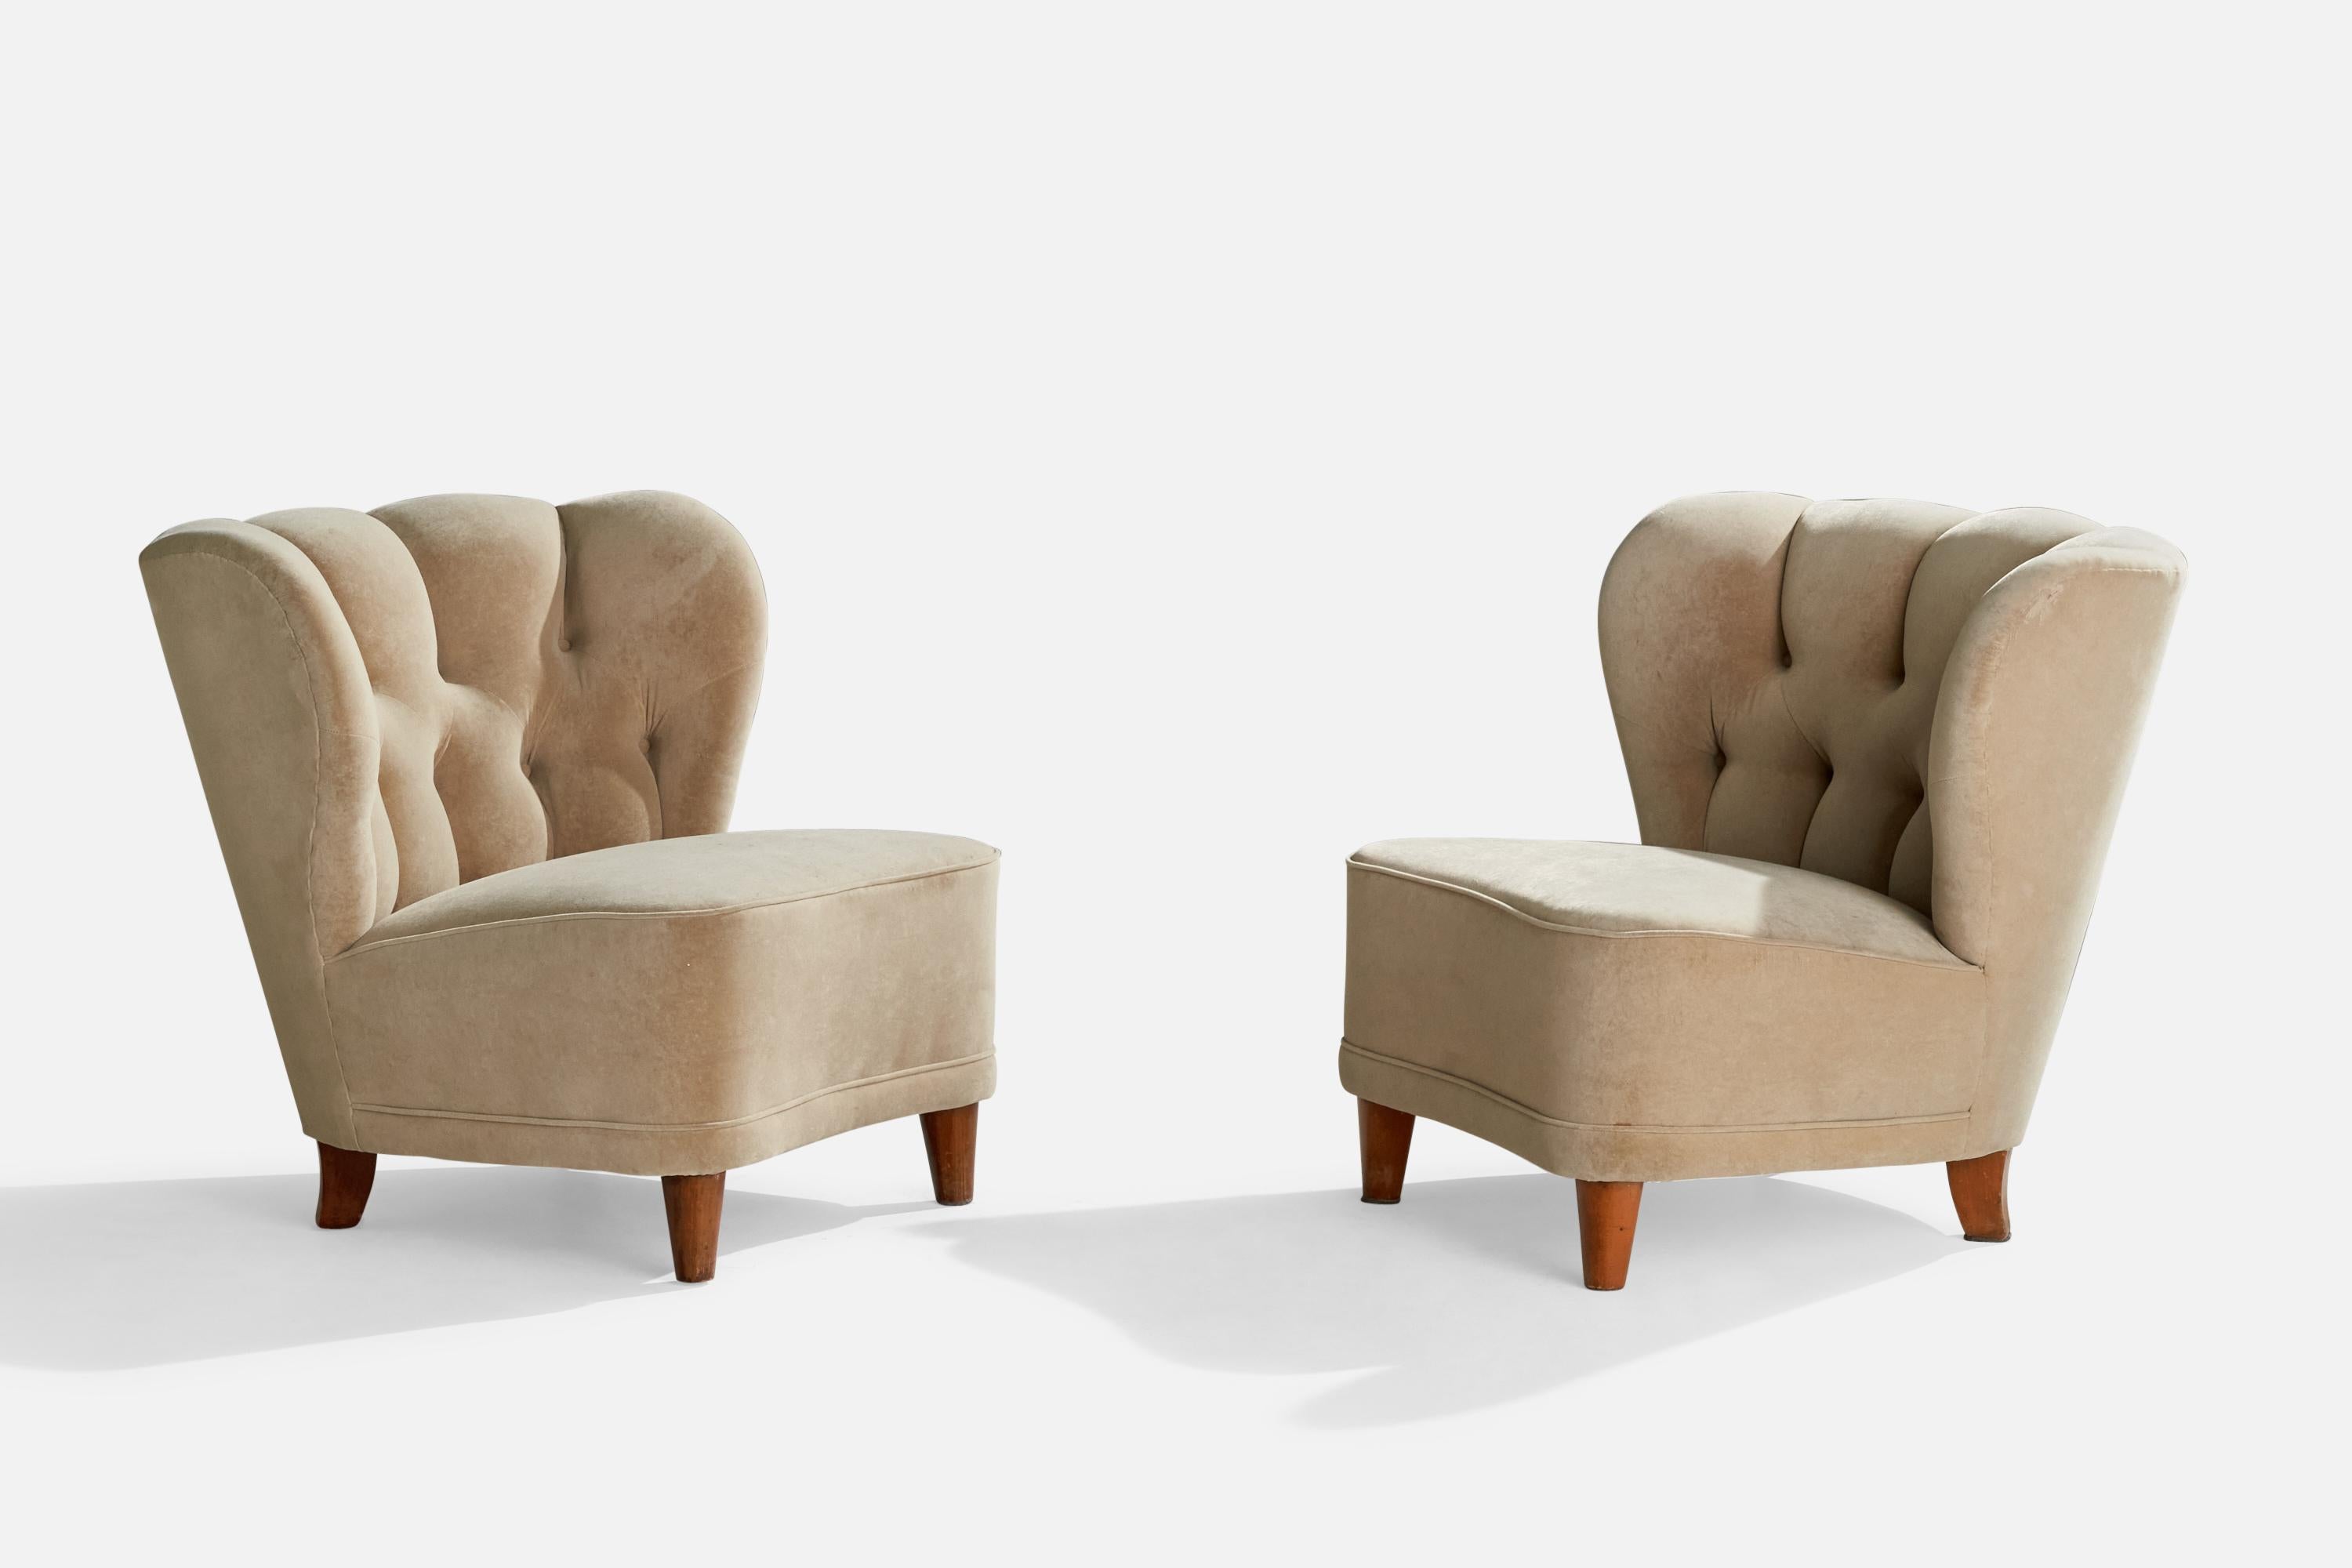 A pair of light beige fabric and wood slipper lounge chairs designed and produced in Finland, 1940s.

Seat height 15”.